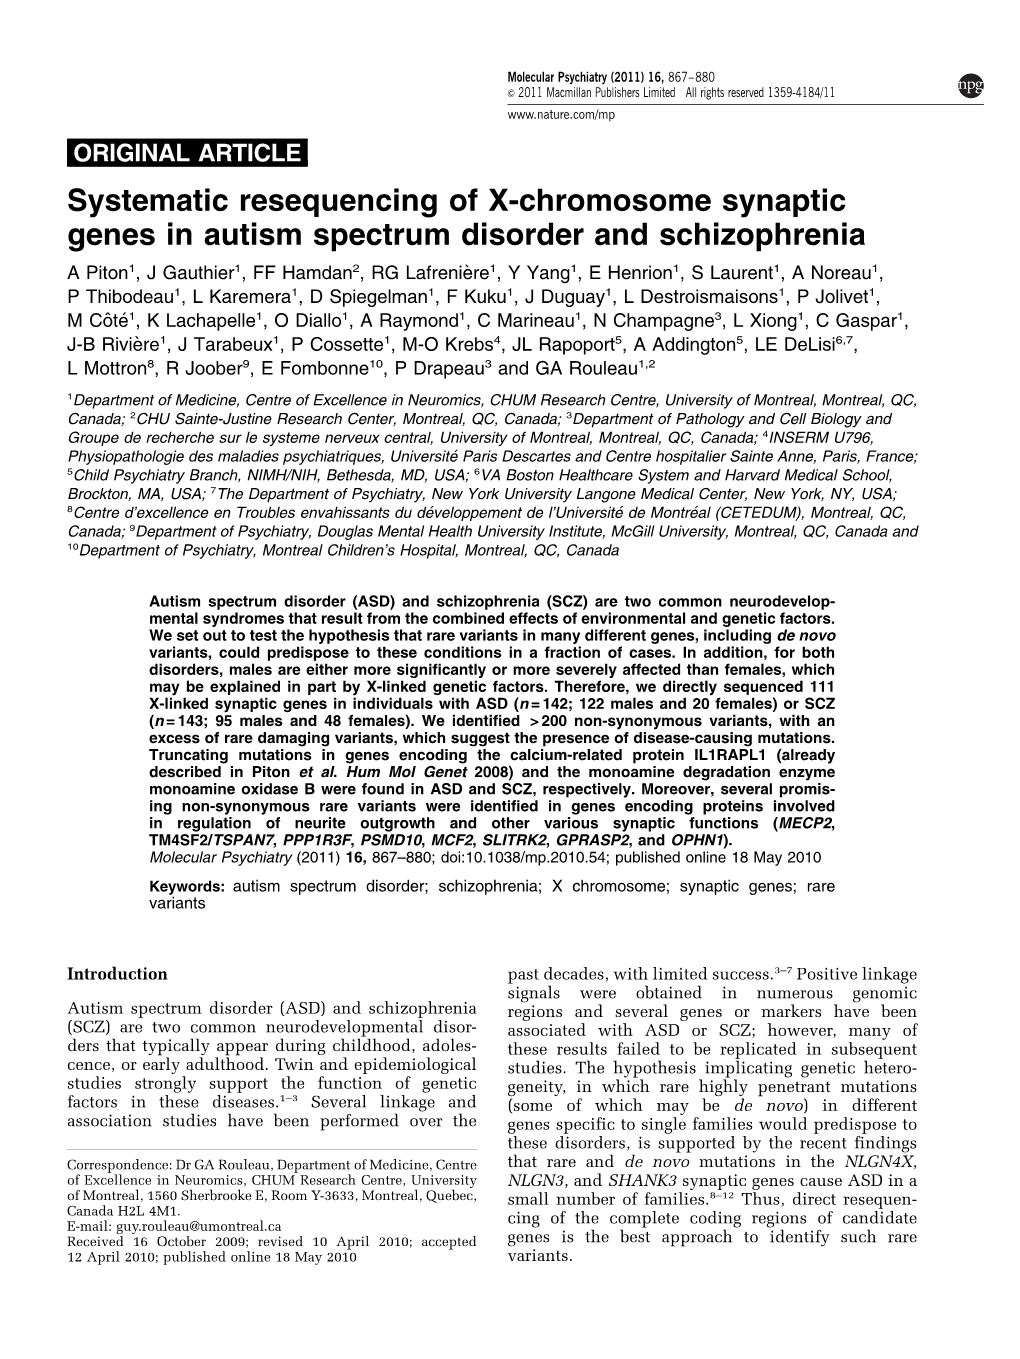 Systematic Resequencing of X-Chromosome Synaptic Genes in Autism Spectrum Disorder and Schizophrenia